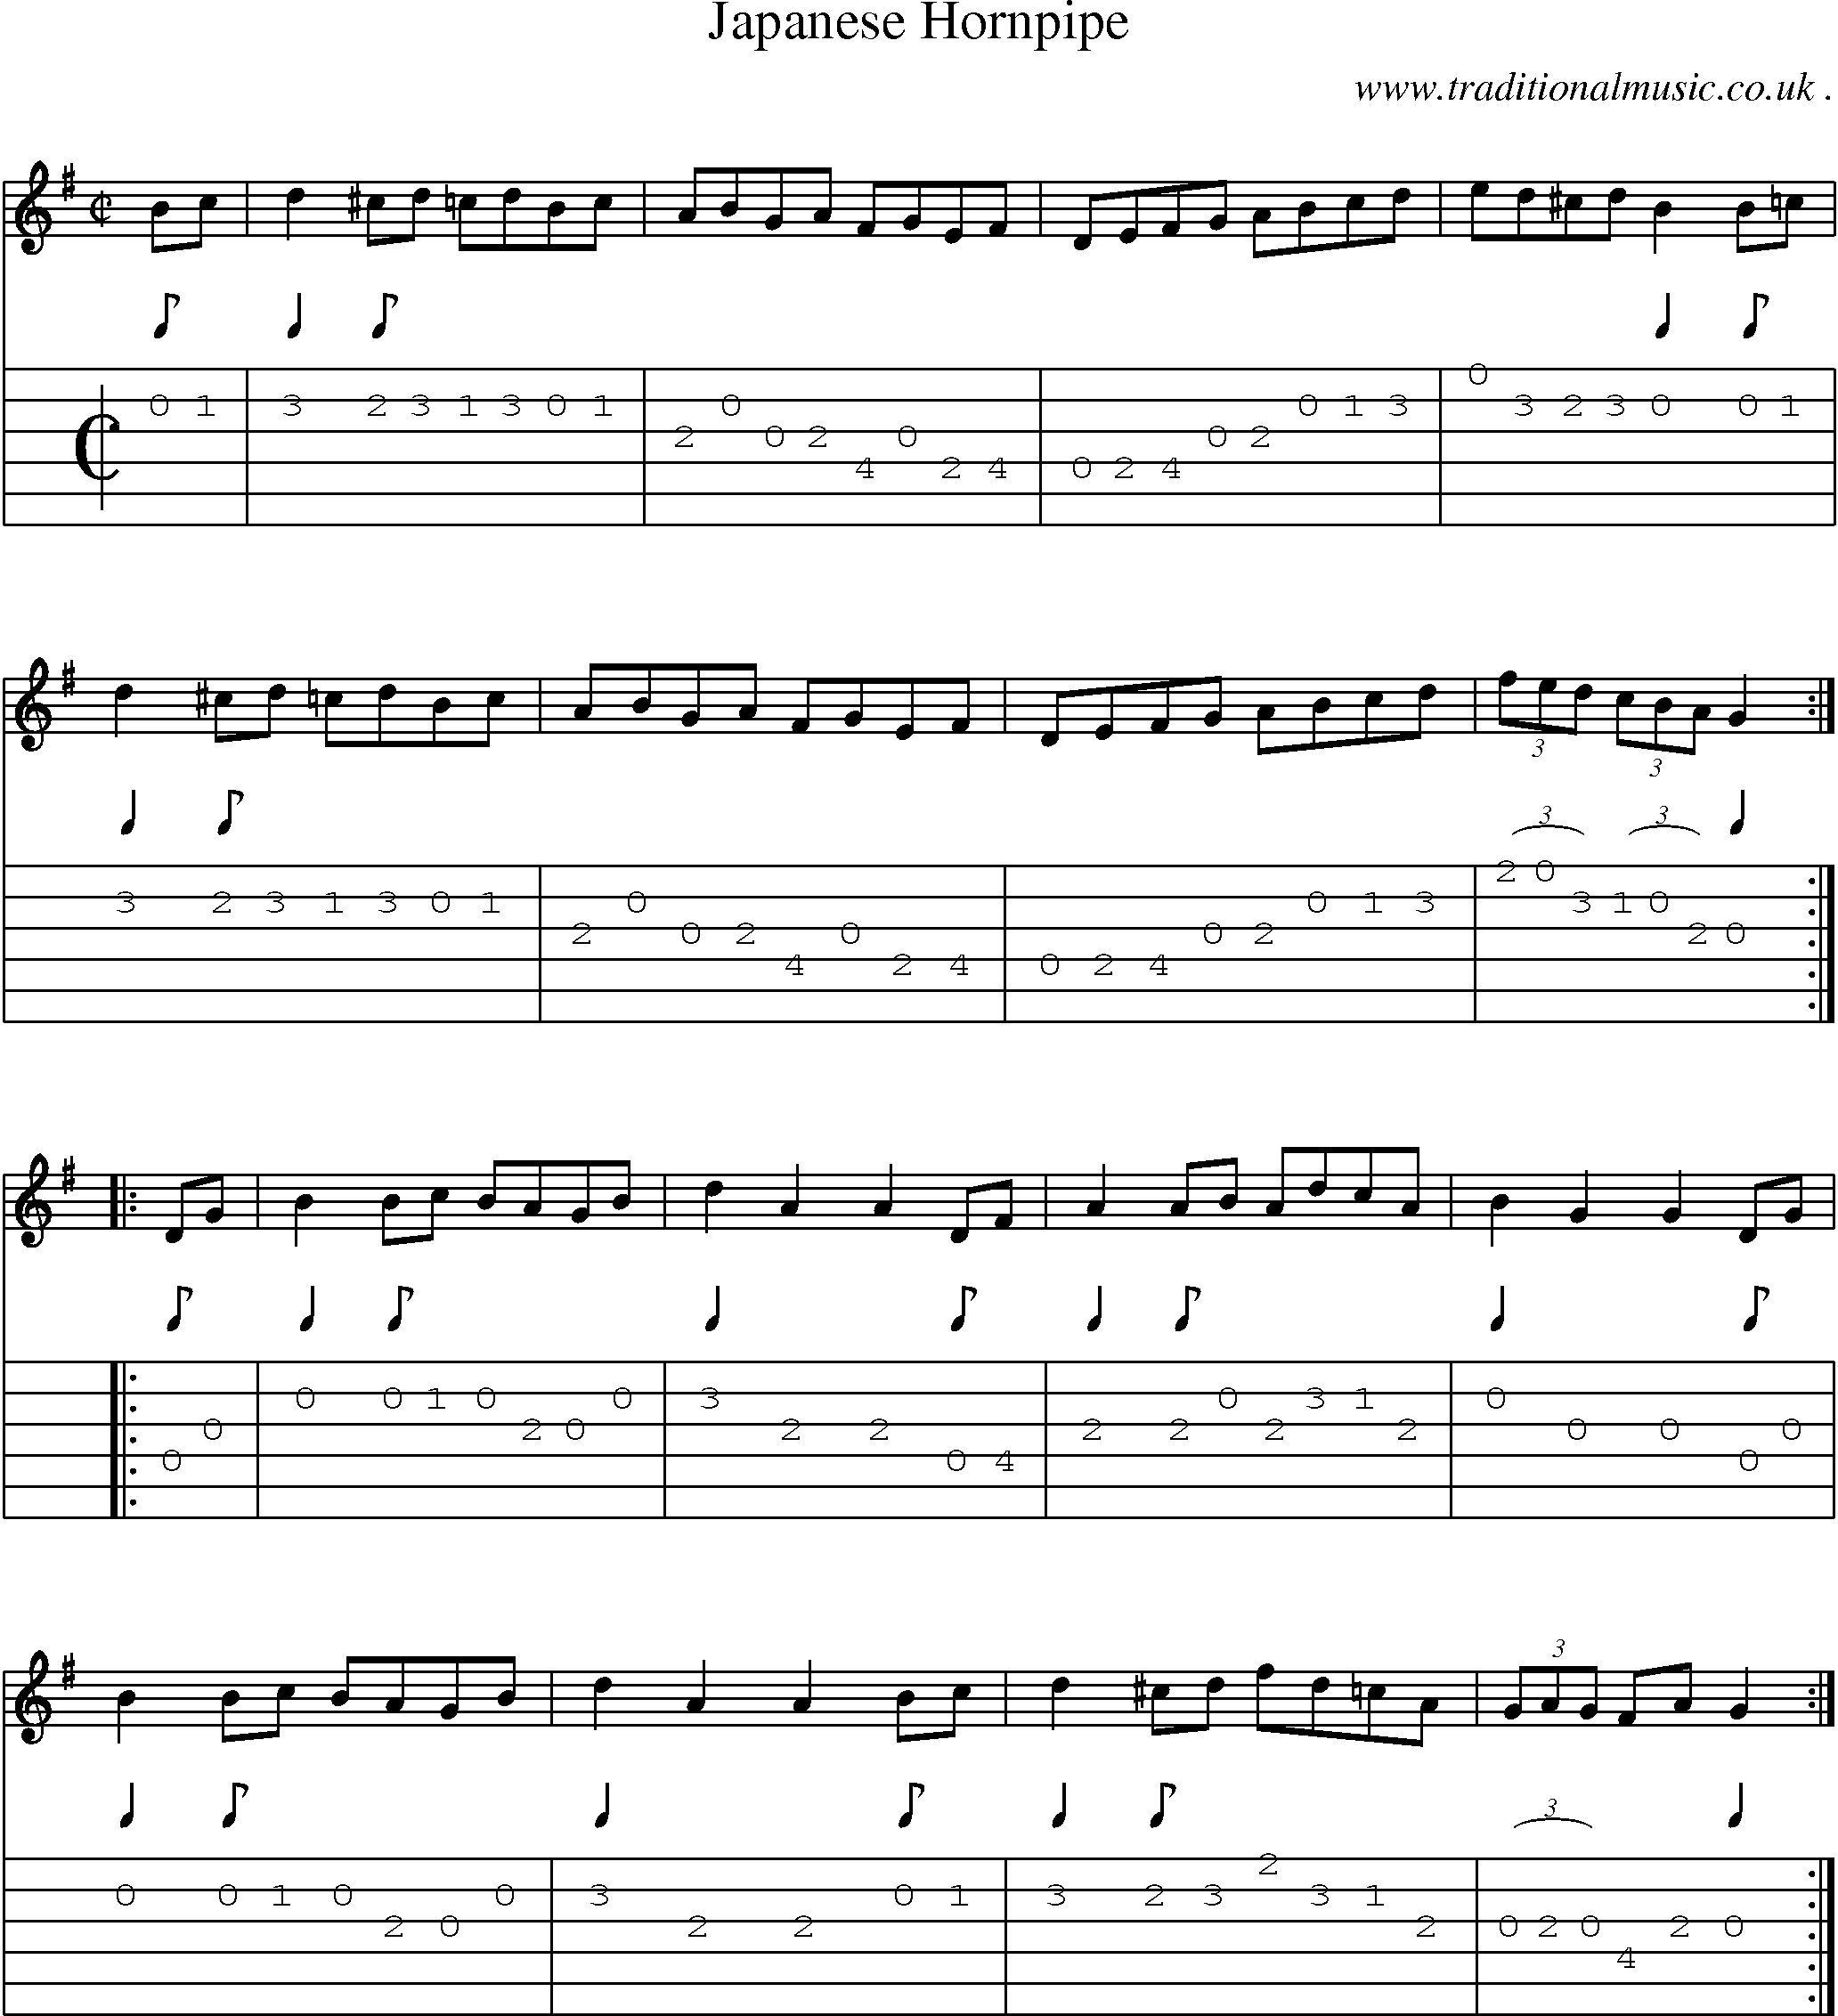 Sheet-Music and Guitar Tabs for Japanese Hornpipe